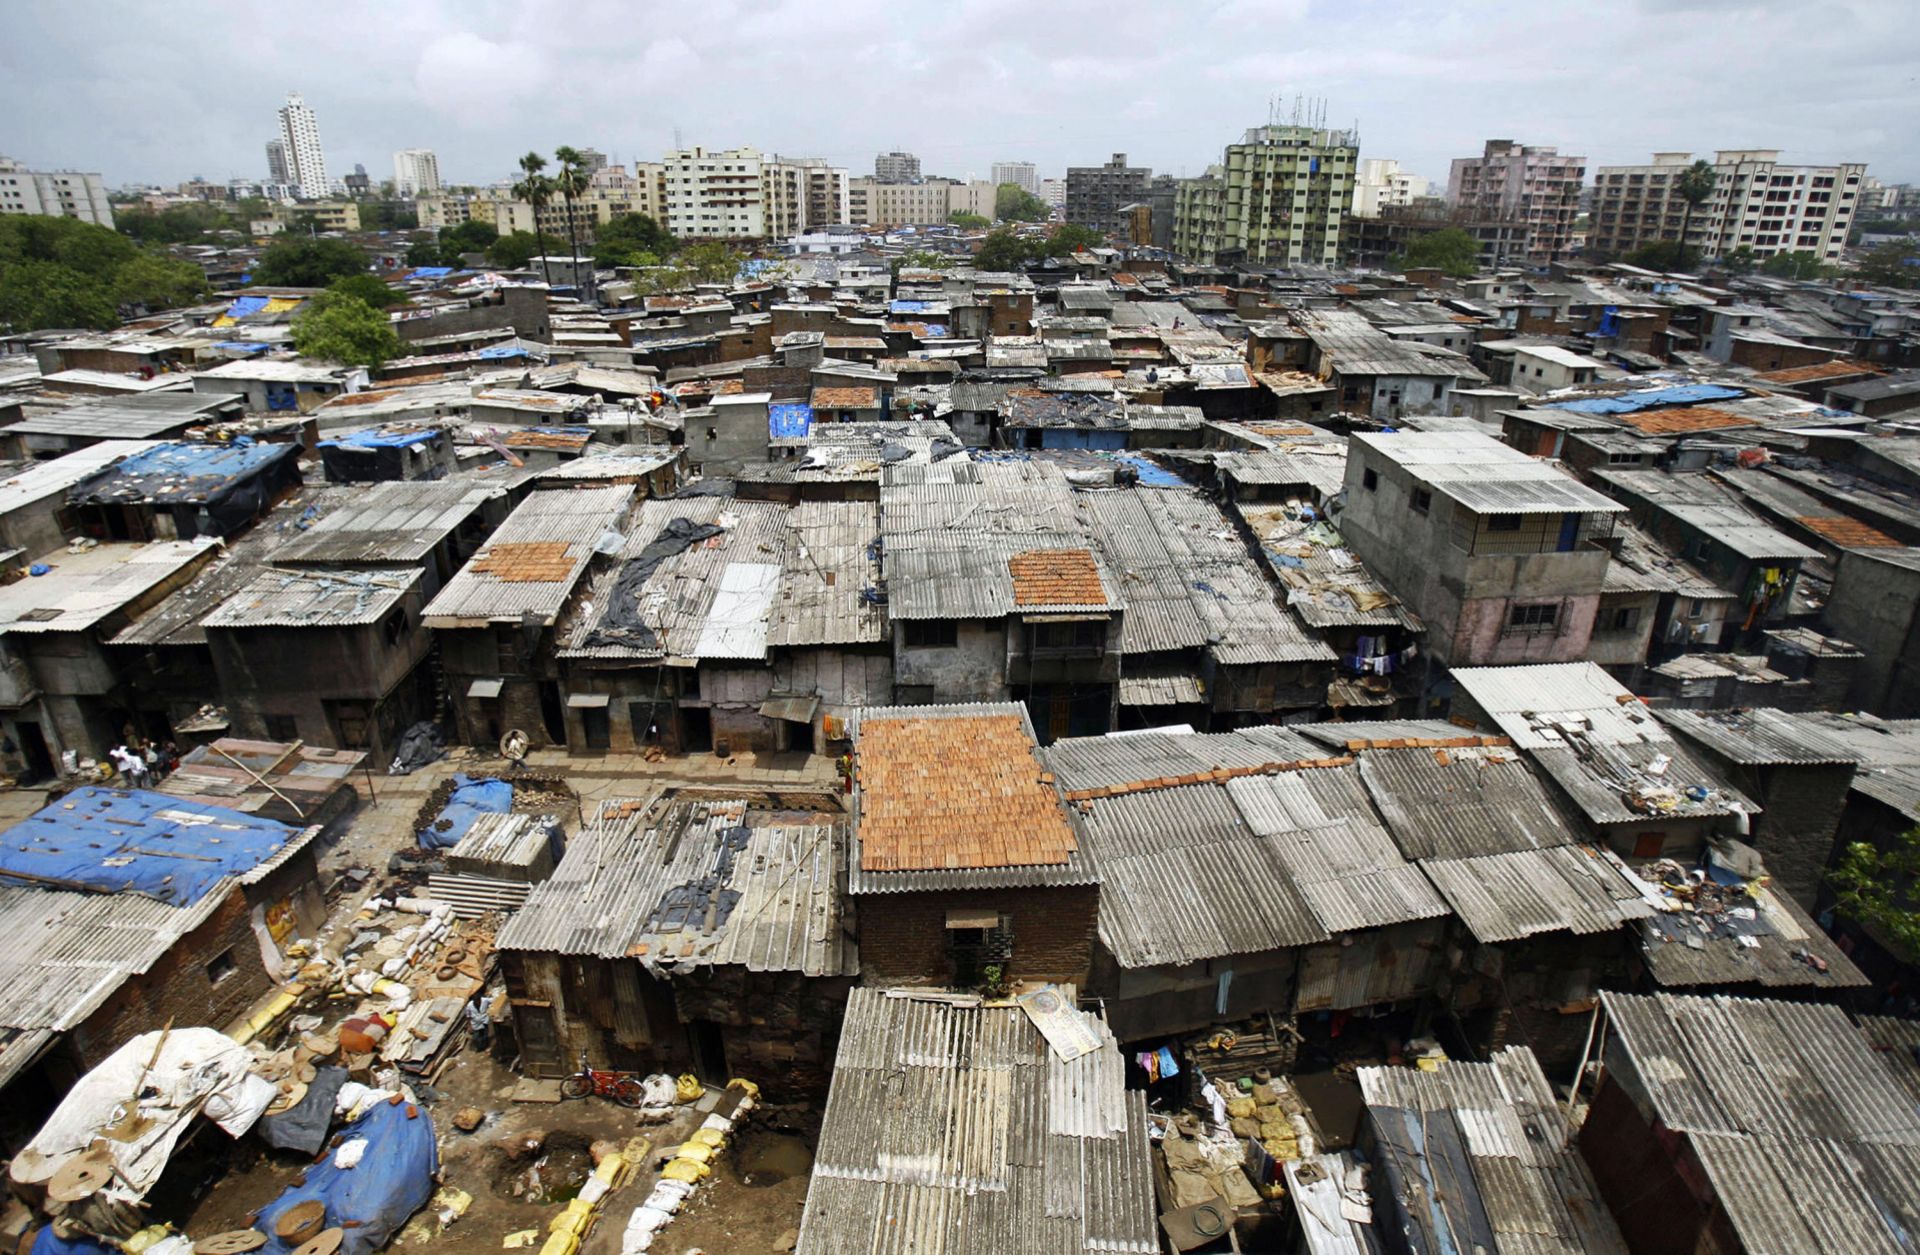 In this 2007 photograph, office blocks and residential buildings tower over the notorious slum colony of Dharavi in Mumbai, India.